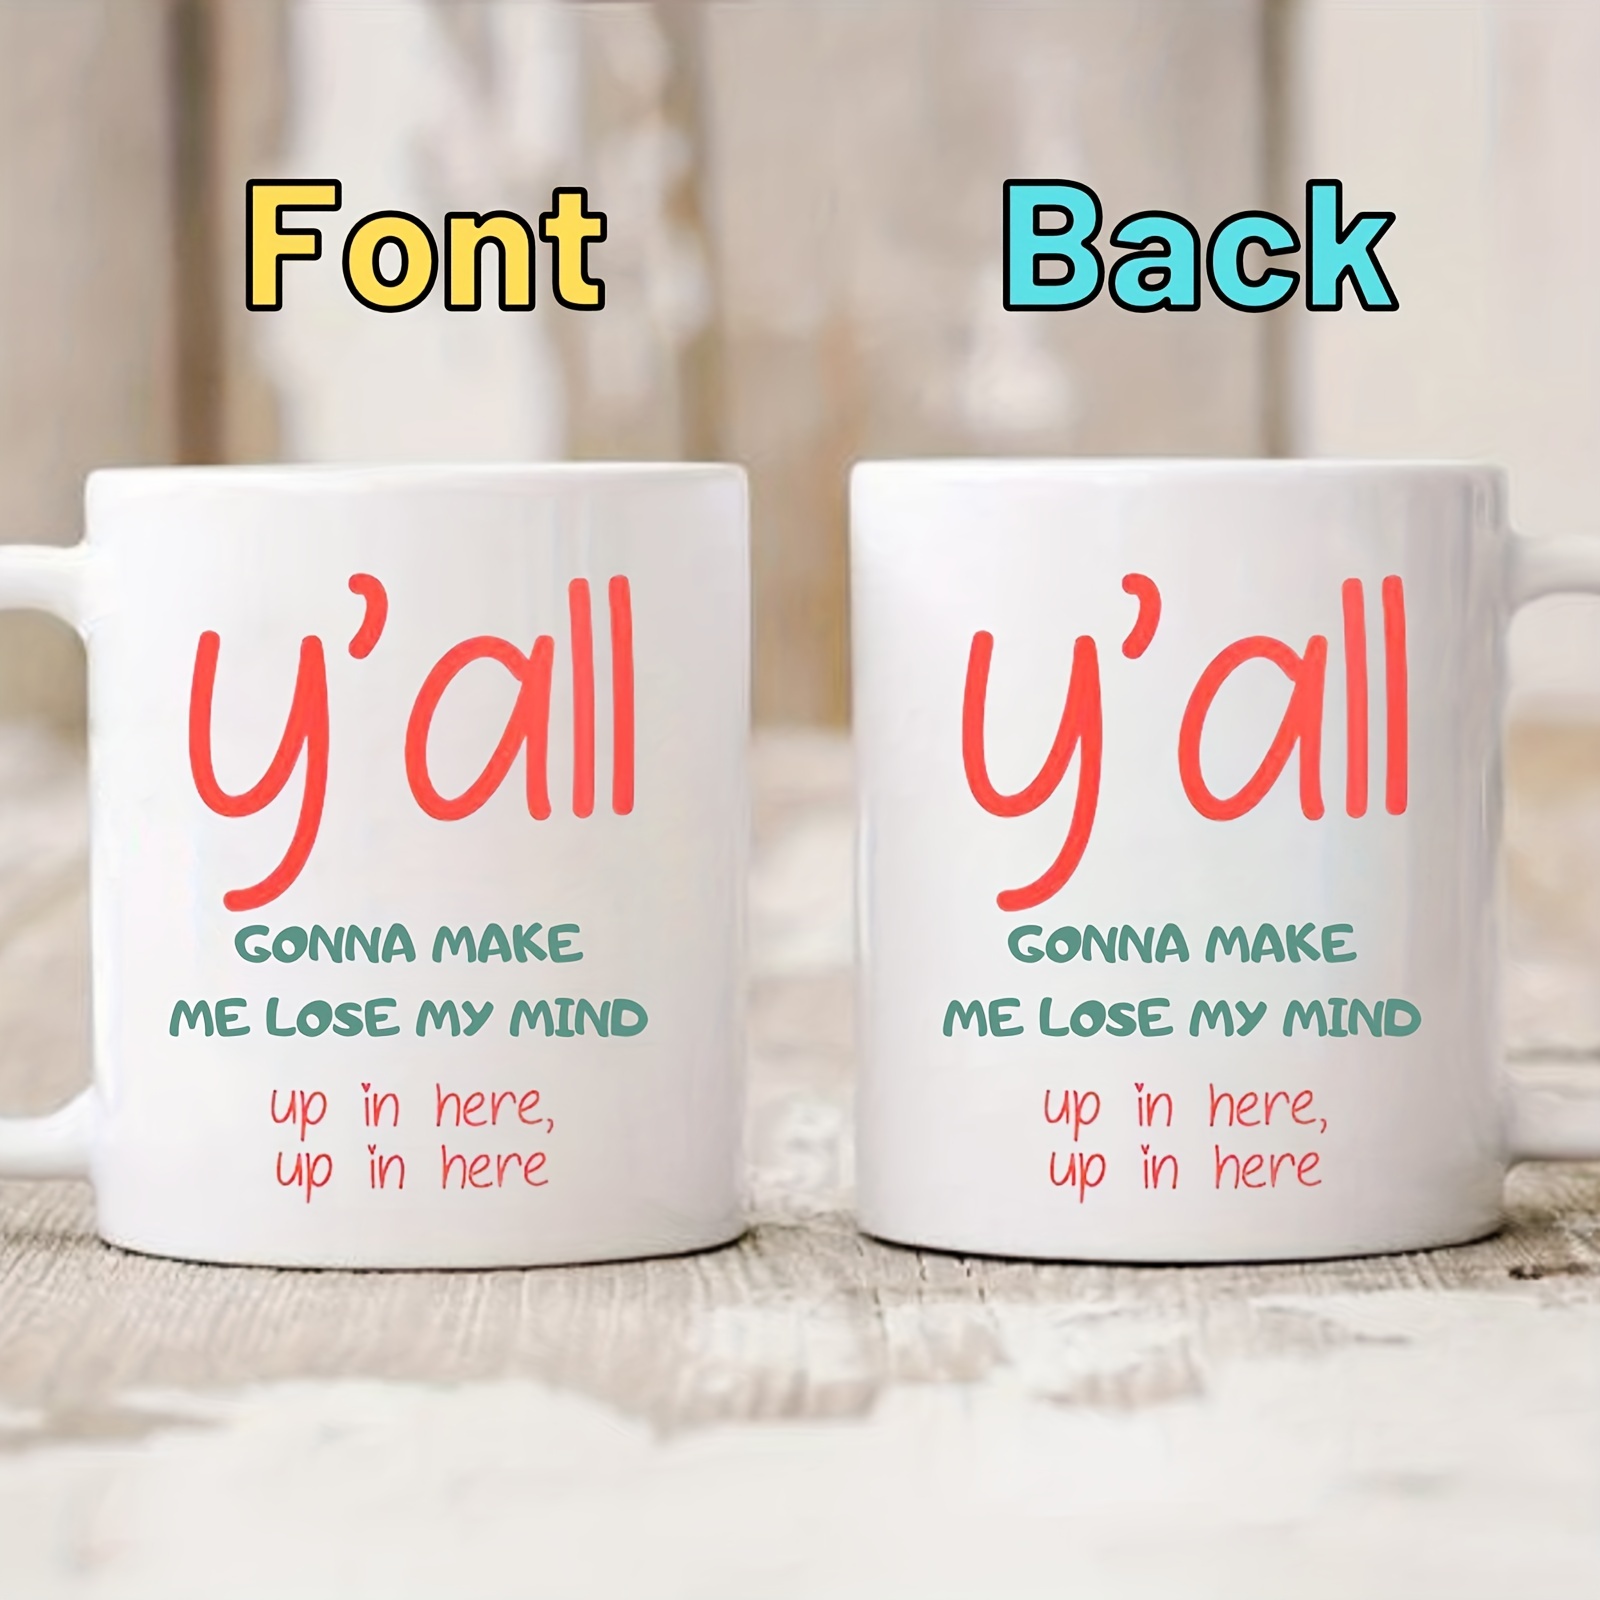 Cute Inspirational Motivational Coffee Mugs for Women - Unique Fun Gifts  for Her, Wife, Friend, Mom, Sister, Teacher, Coworkers - Coffee Cups & Mugs